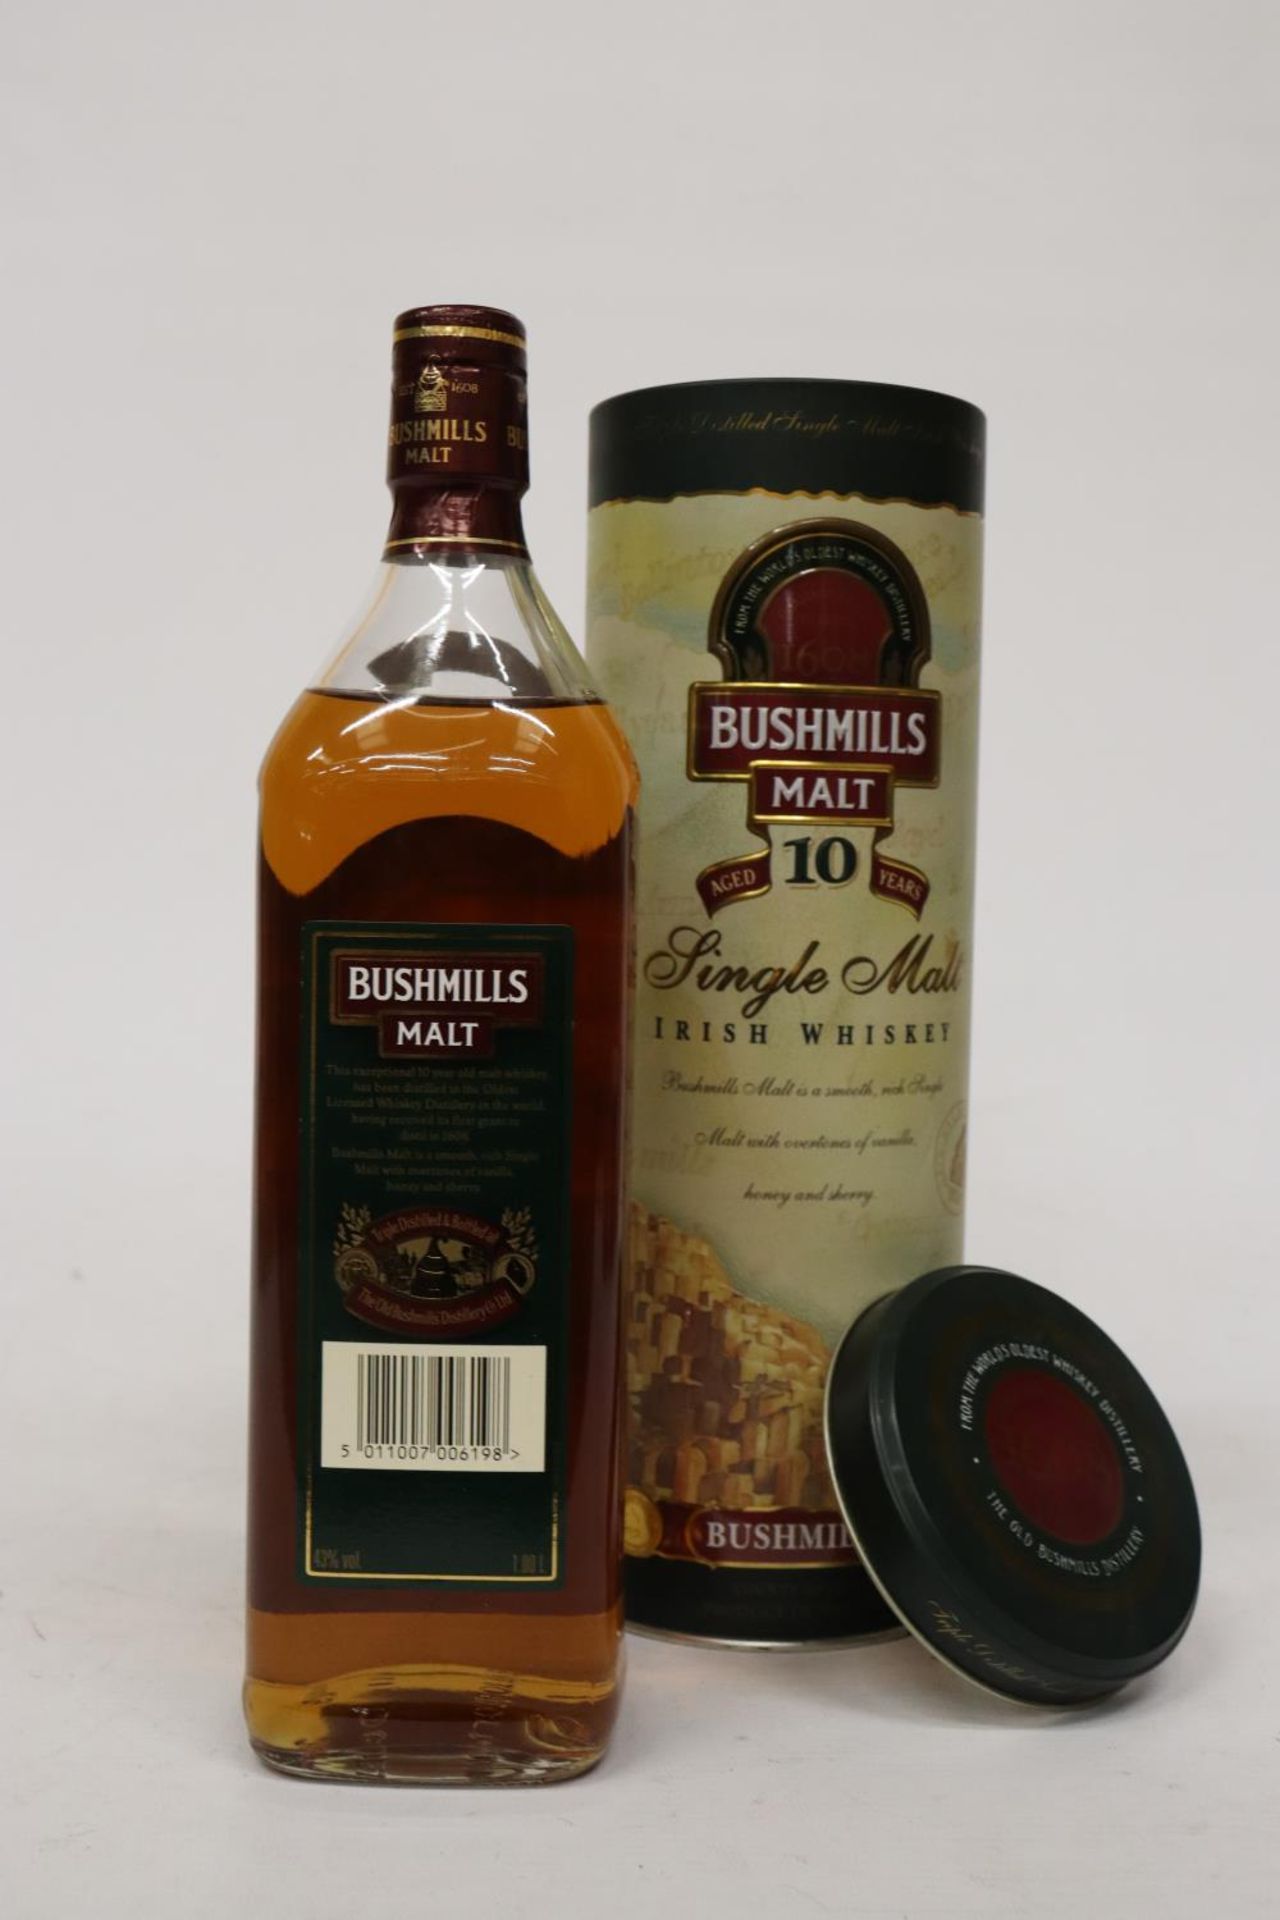 A BOTTLE OF BUSHMILLS 10 YEAR OLD MALT WHISKY, BOXED - Image 4 of 5